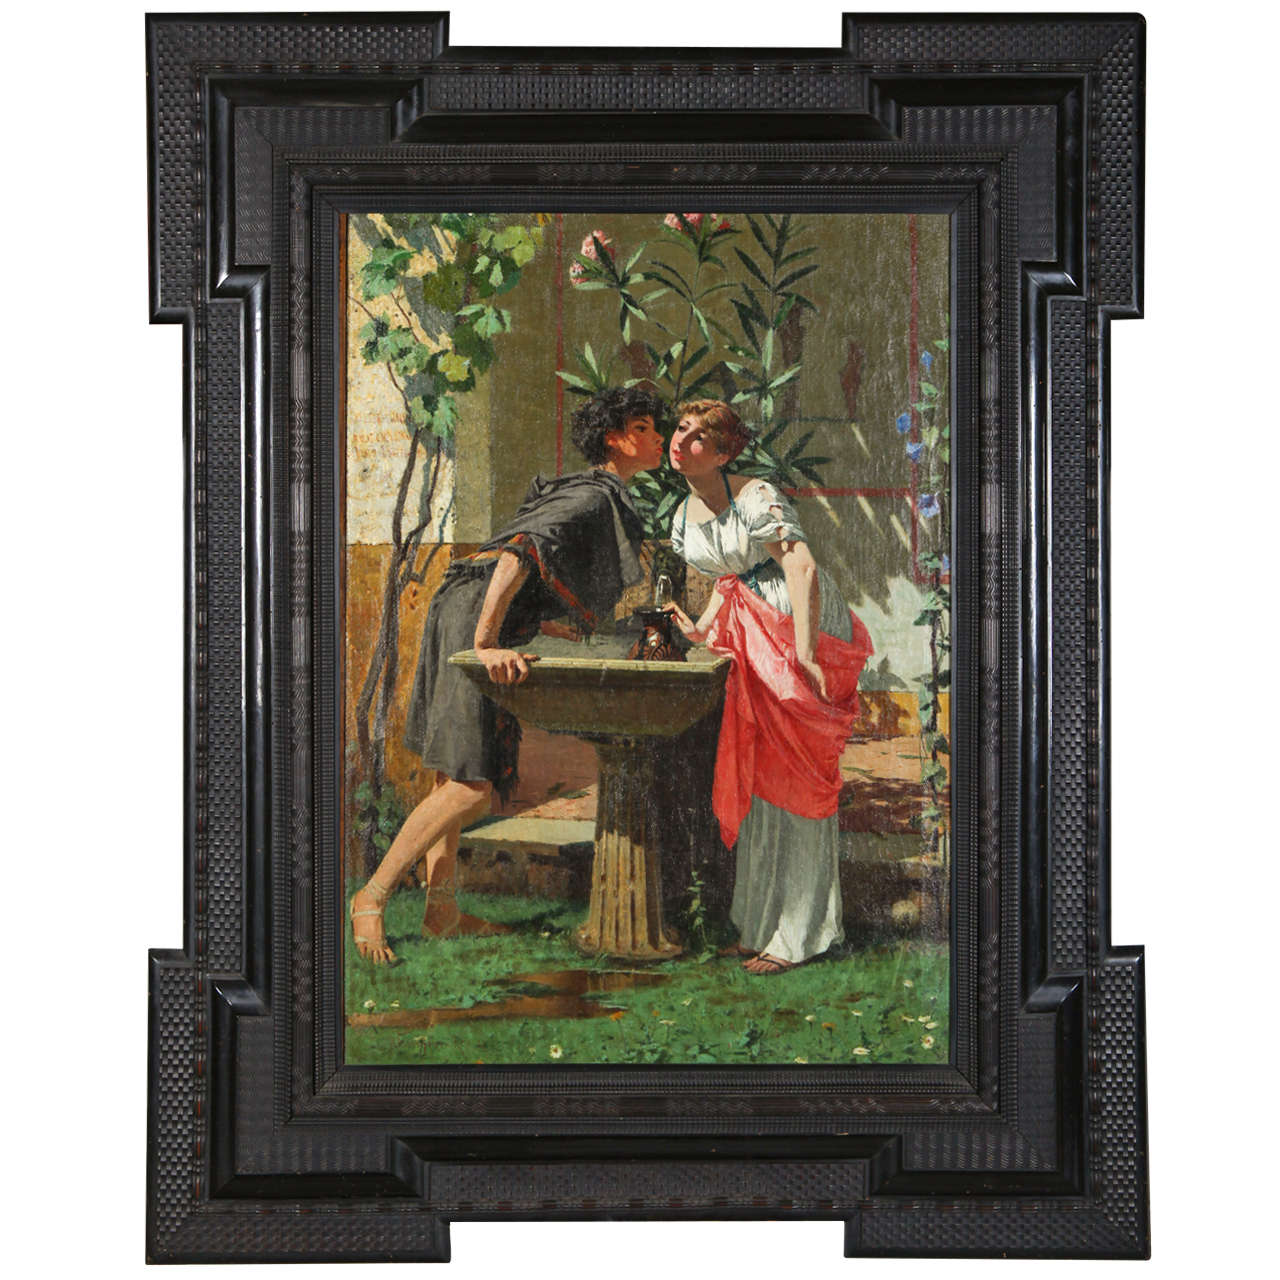 Lovers by a Fountain, Painting Oil on Canvas